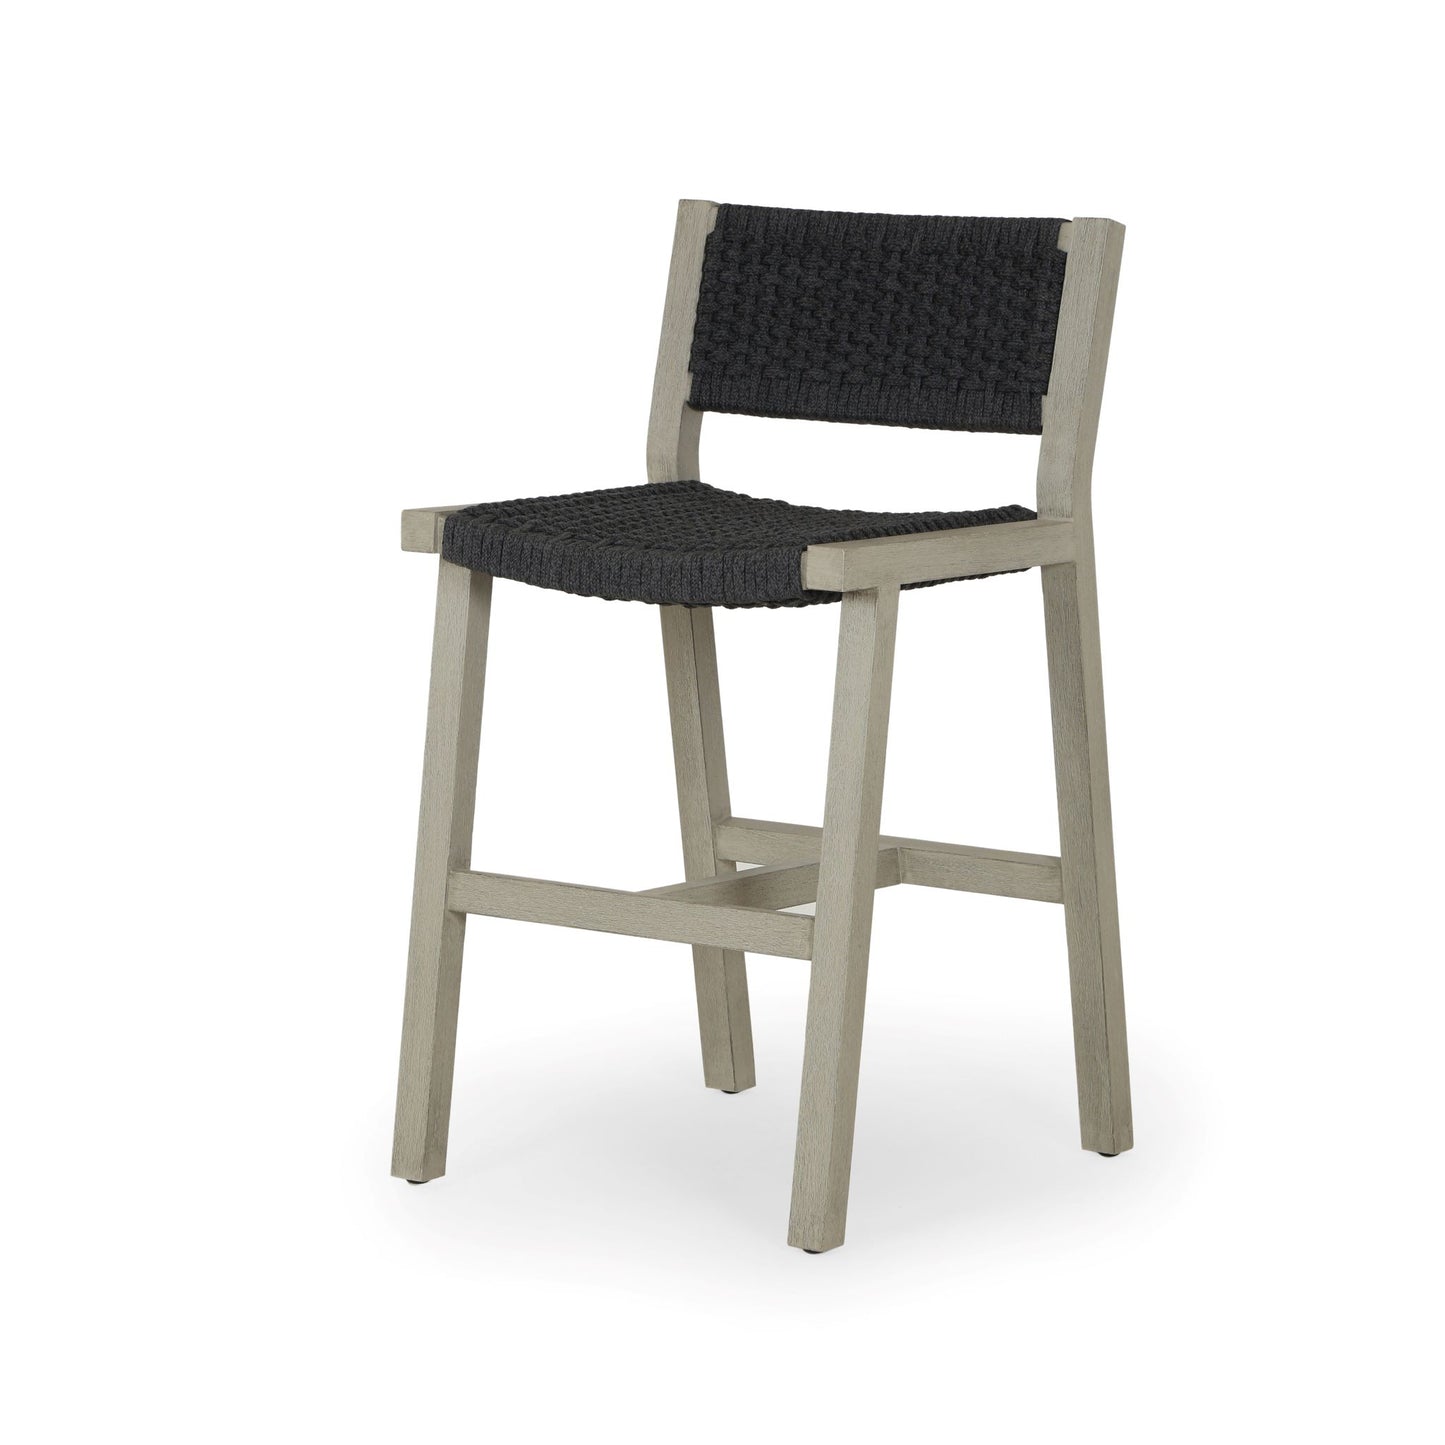 Delano Outdoor Bar + Counter Stool Counter / Weathered GreyBAR AND COUNTER STOOL Four Hands  Counter Weathered Grey  Four Hands, Mid Century Modern Furniture, Old Bones Furniture Company, Old Bones Co, Modern Mid Century, Designer Furniture, https://www.oldbonesco.com/